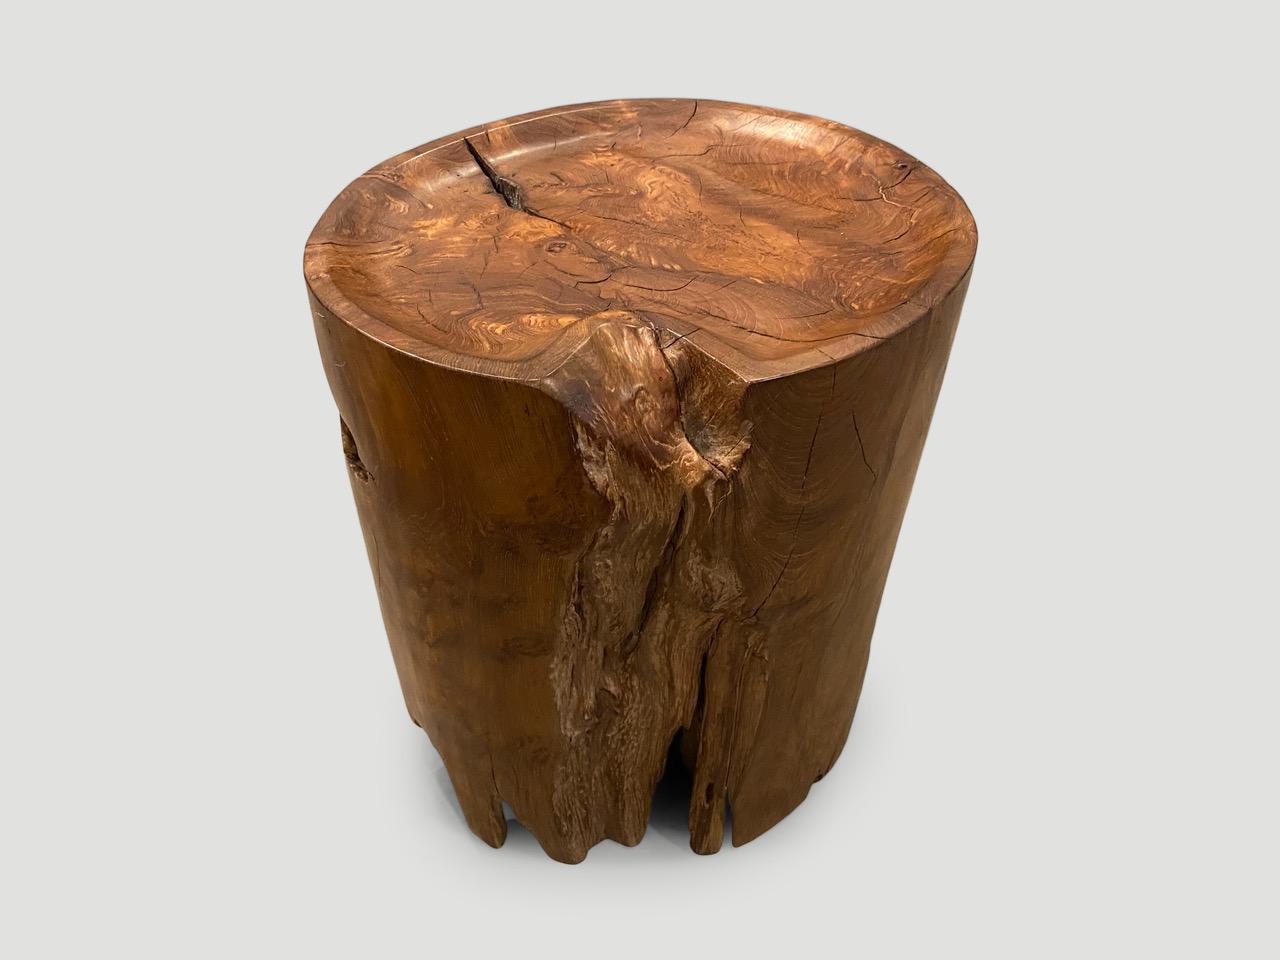 Natural organic formed reclaimed teak root side table. We hand carved the top section into a tray style and polished the beautiful aged teak with a natural oil finish. Organic is the new modern. We have a collection. All unique. The price and size